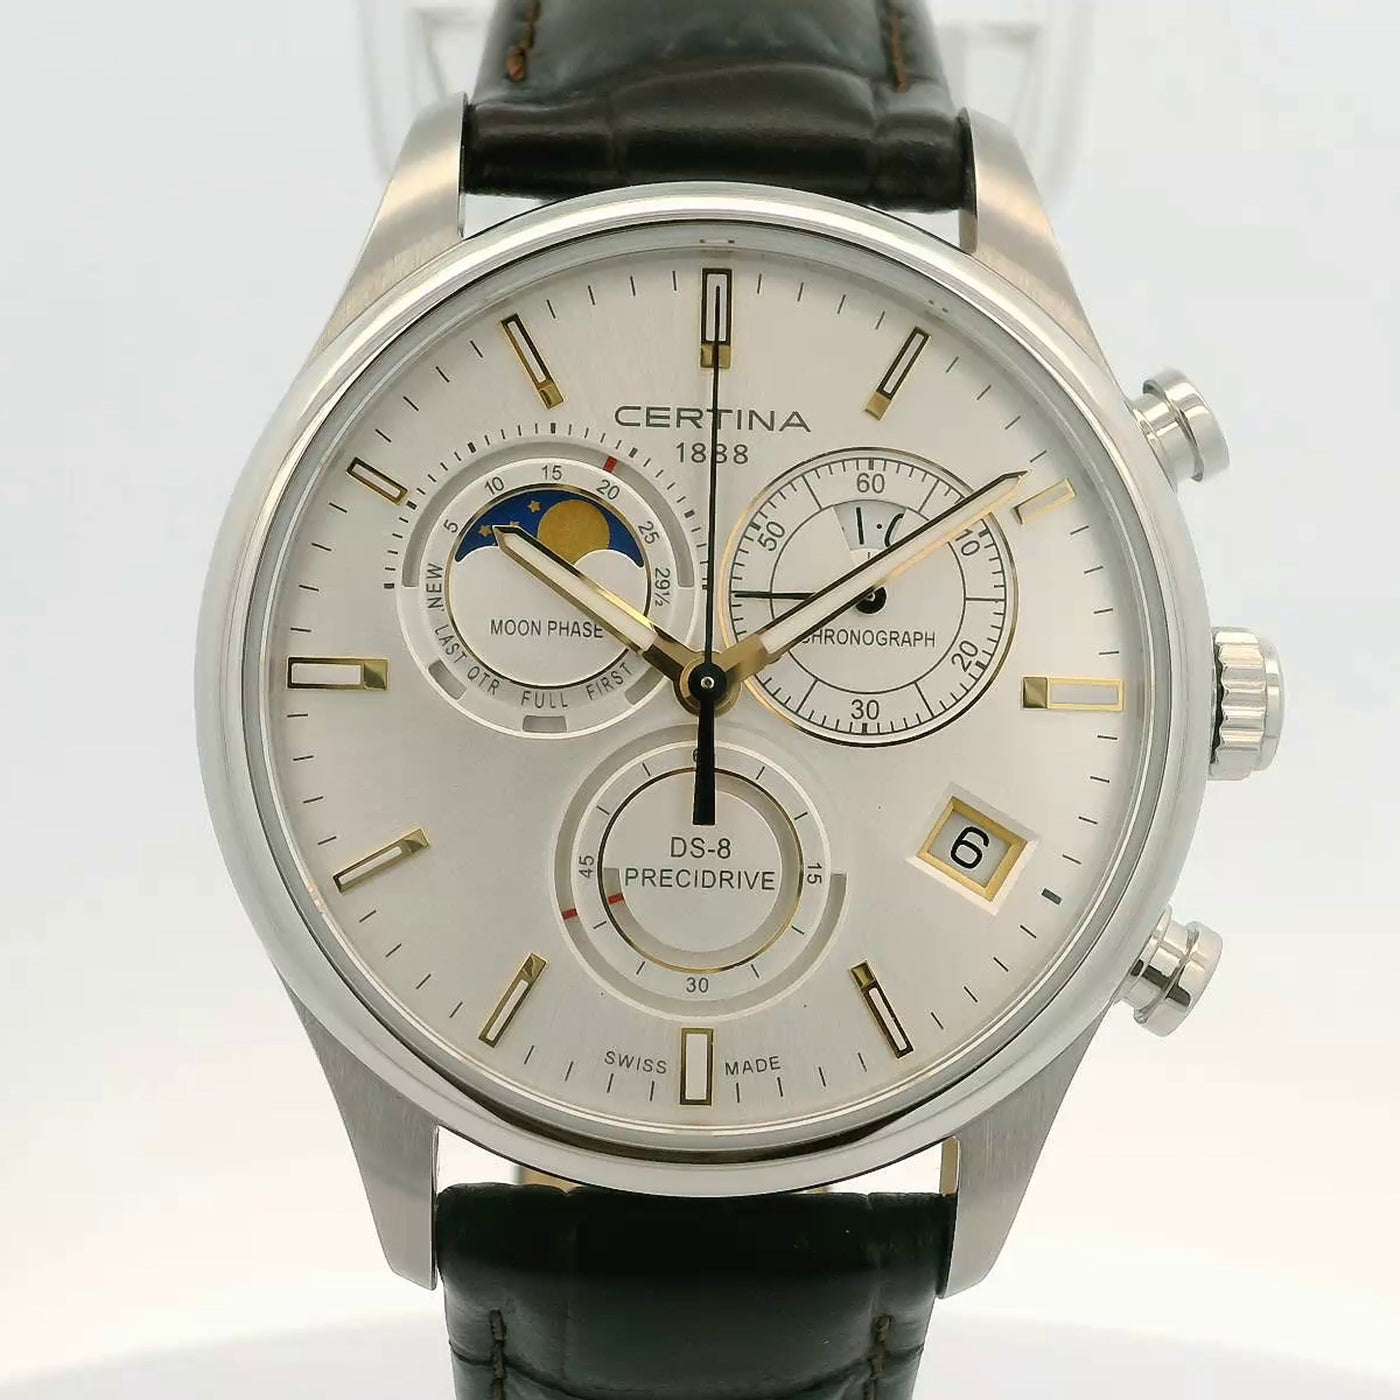 DS-8 Chronograph Moon Phase